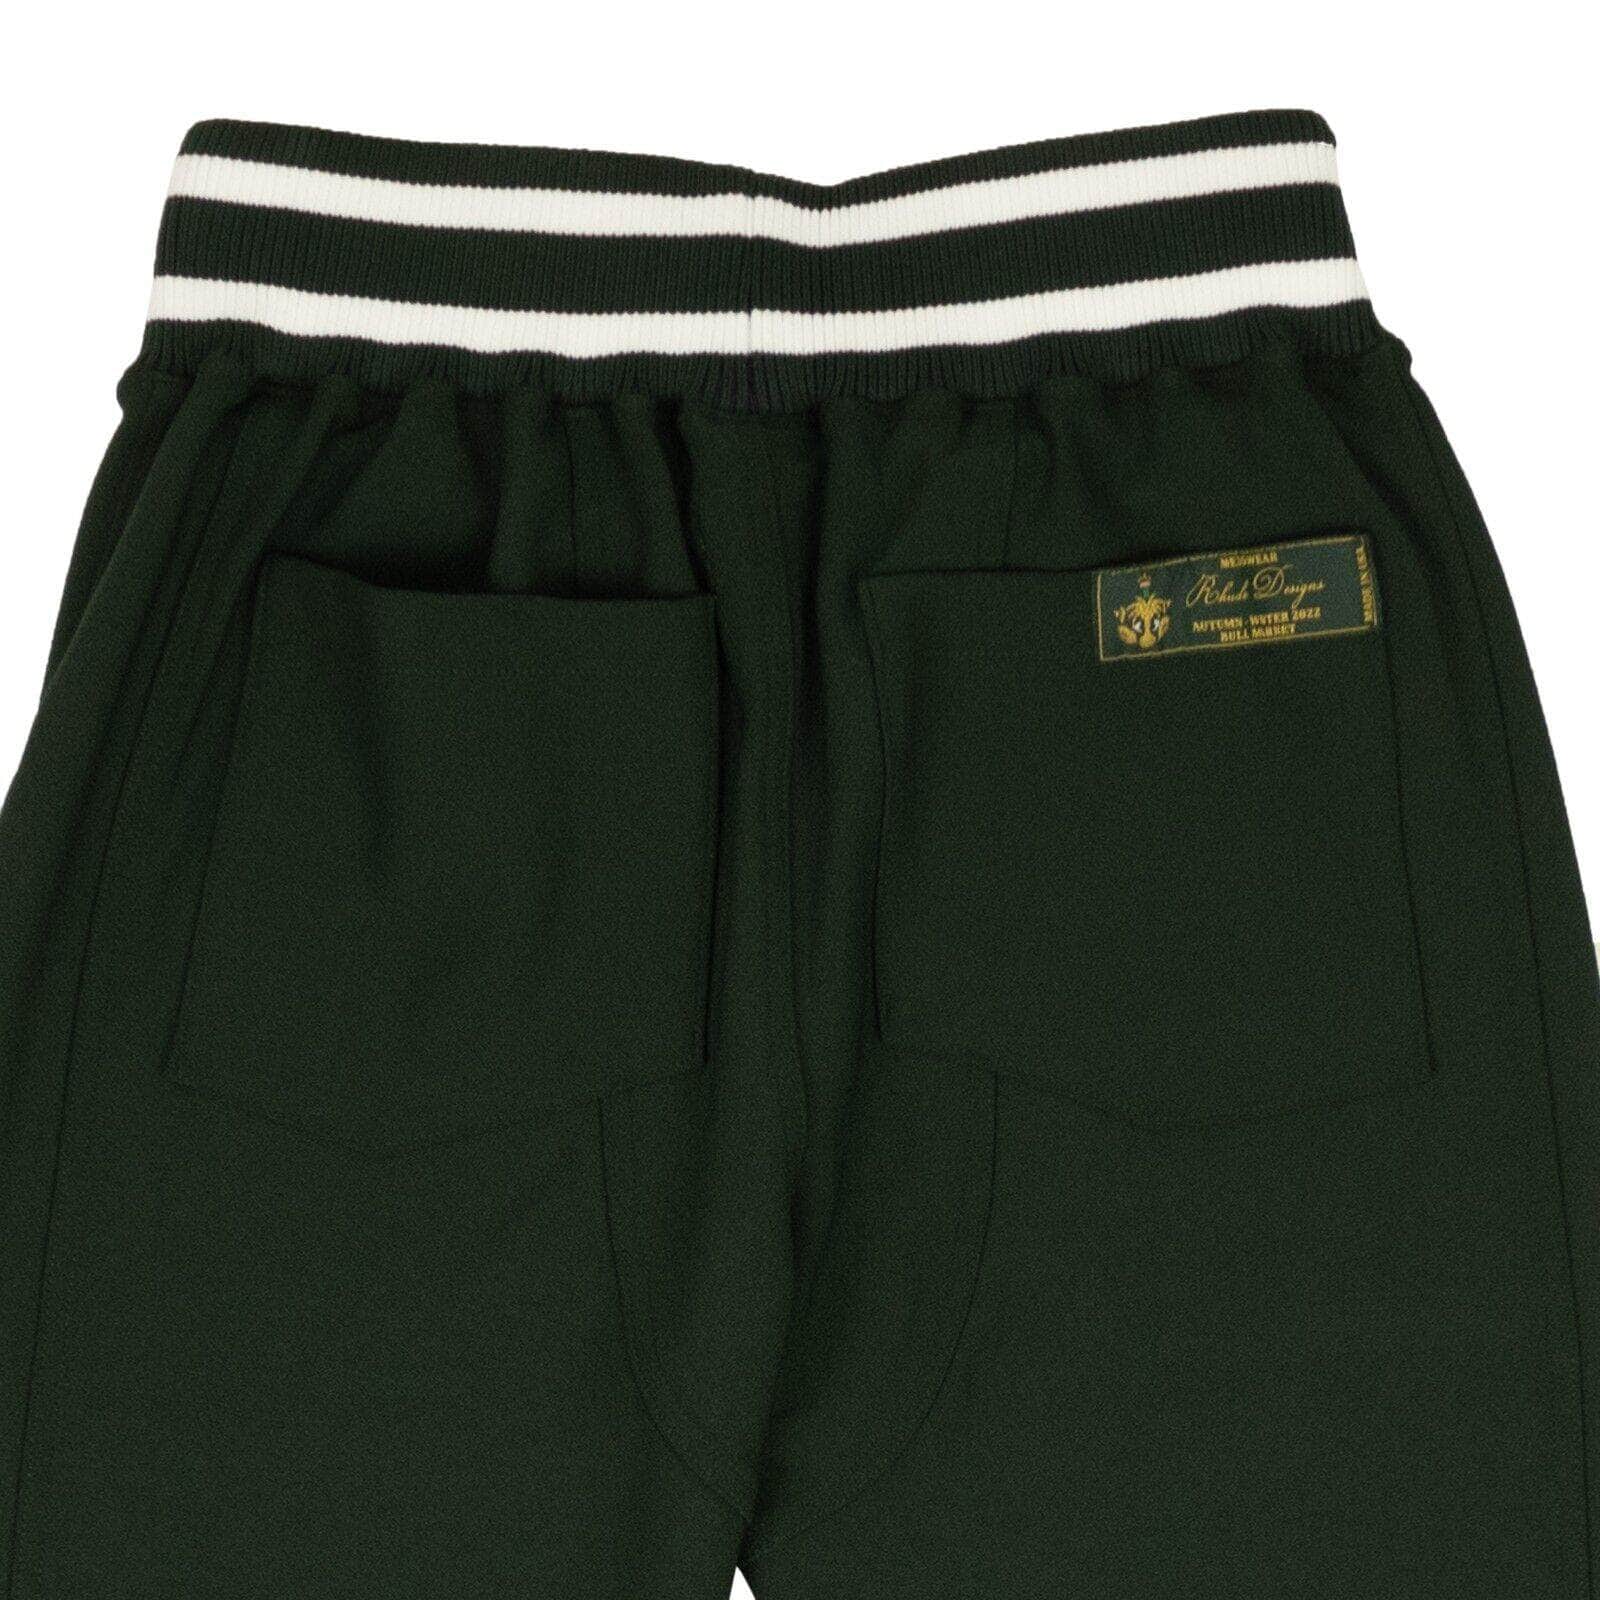 Rhude 500-750, channelenable-all, chicmi, couponcollection, gender-mens, main-clothing, mens-joggers-sweatpants, mens-shoes, rhude, size-l L Forest Green Polyester Tracksuit Ribbed Pants RHD-XBTM-0045/L RHD-XBTM-0045/L